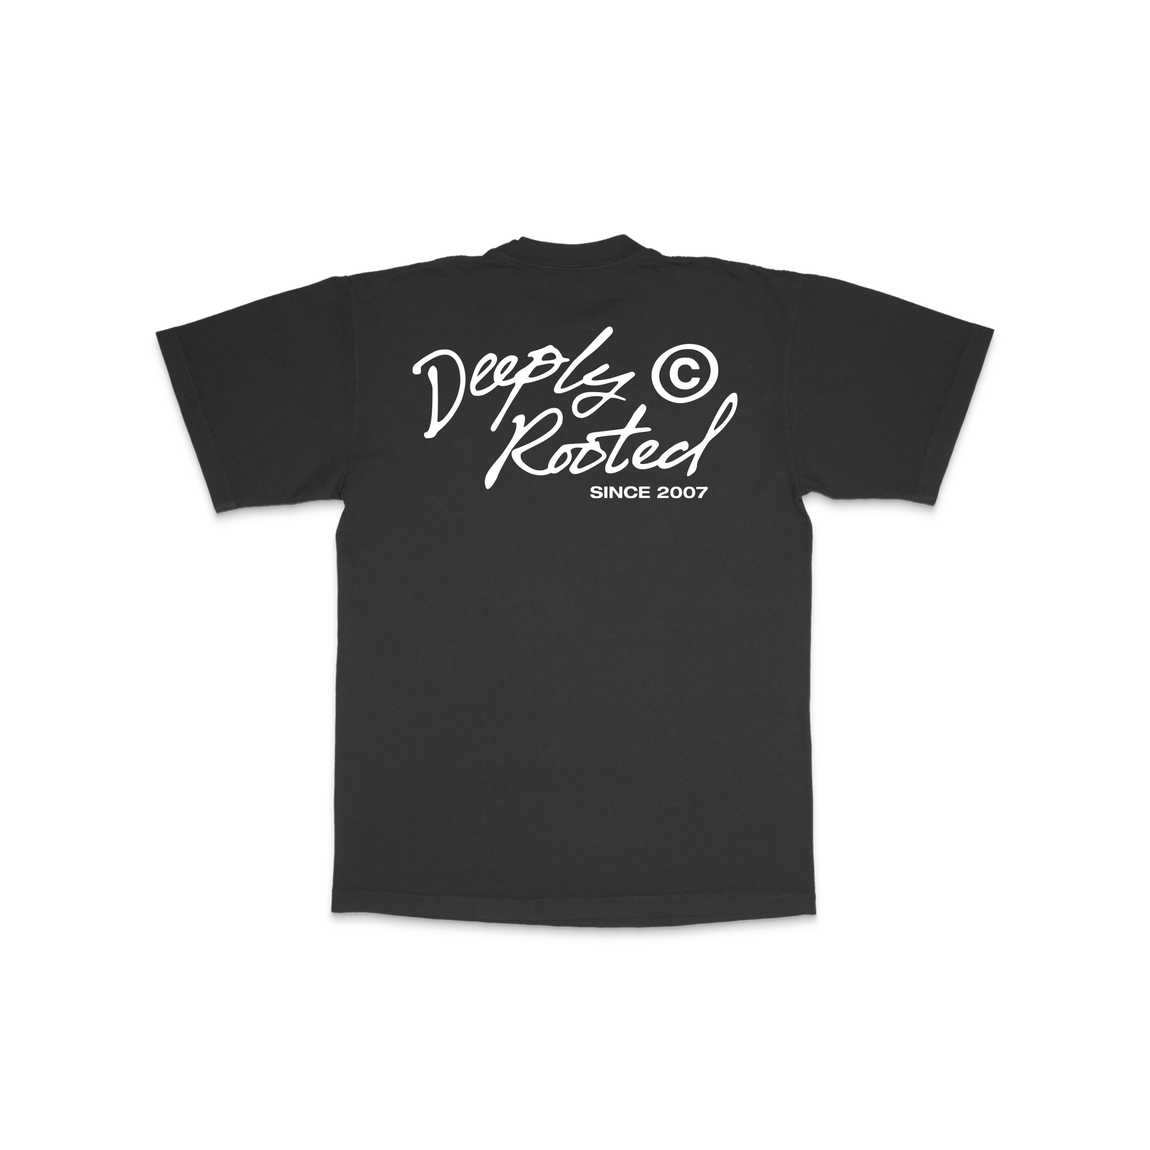 Centre Deeply Rooted Tee (Vintage Black) - Centre Deeply Rooted Tee (Vintage Black) - 